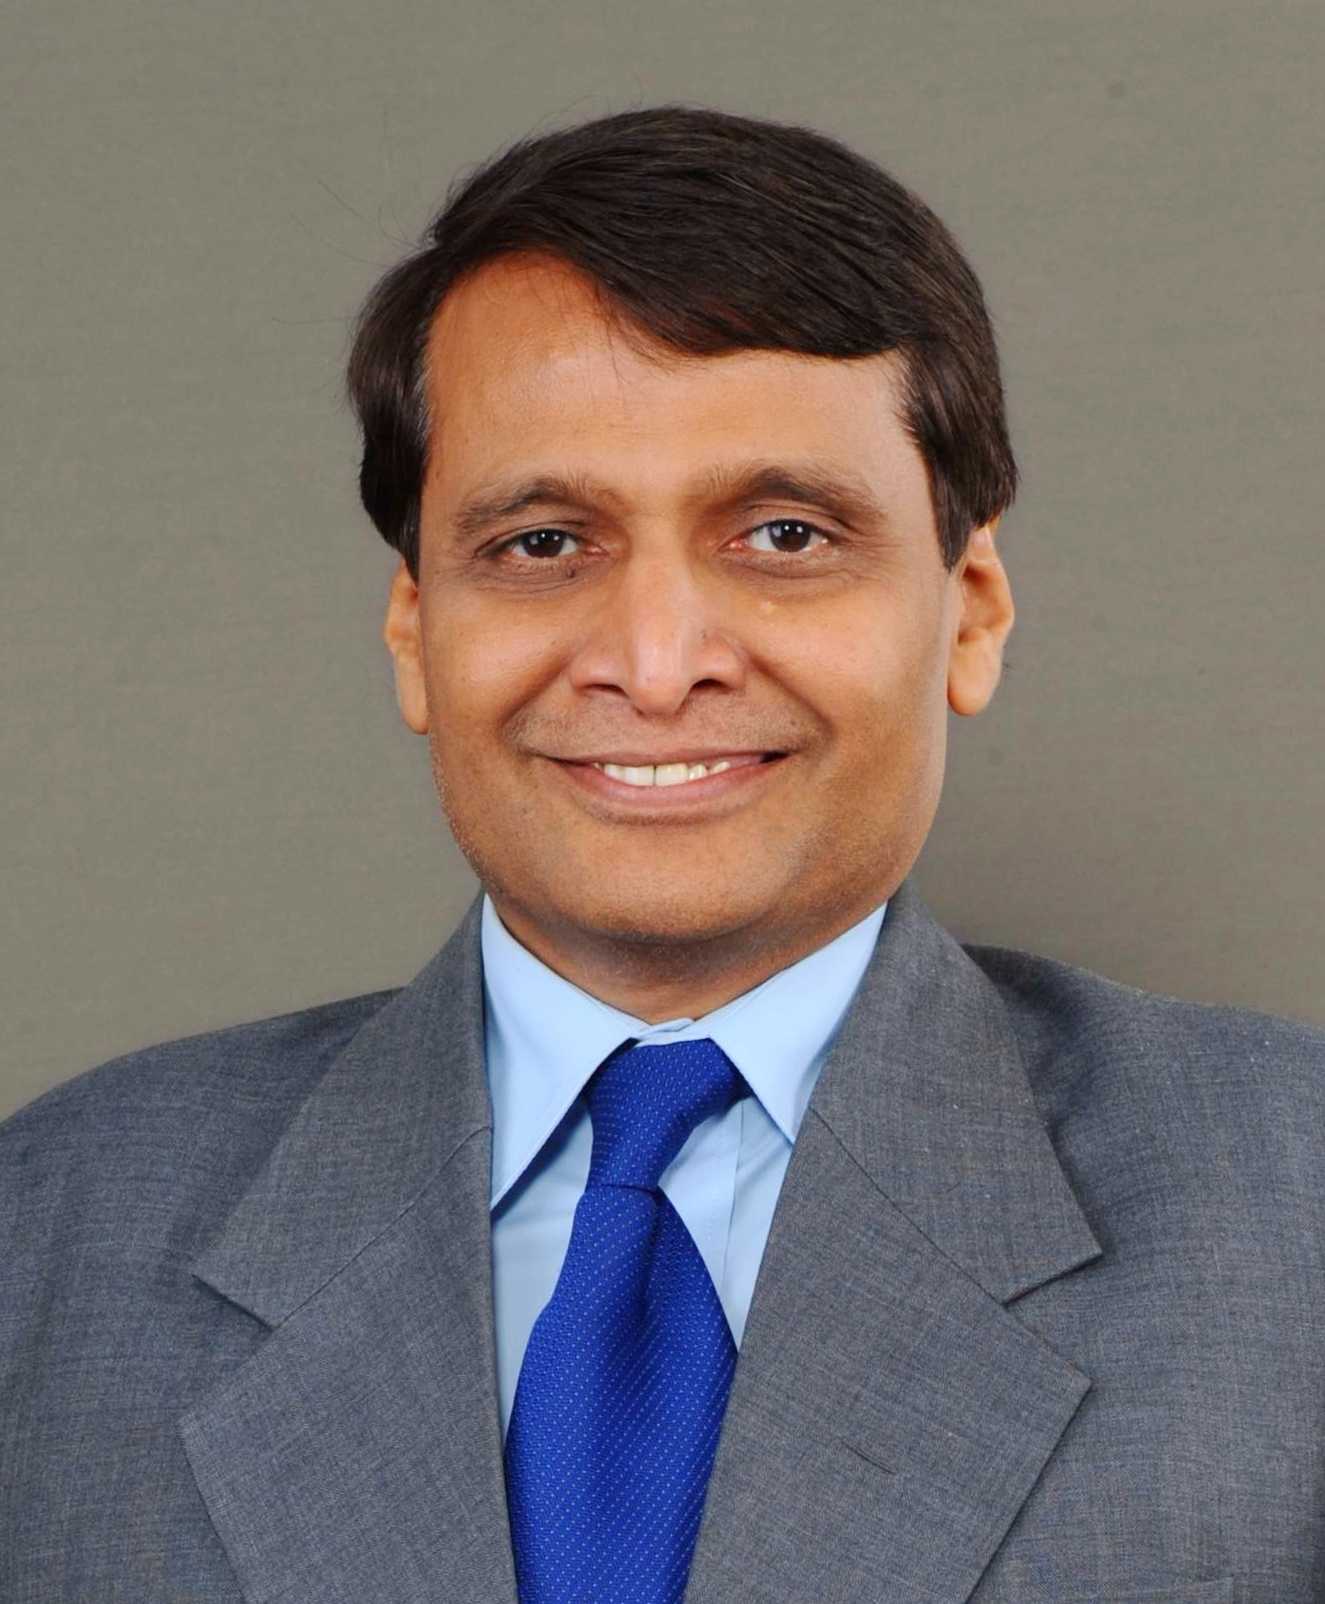 <strong>Chief Guest</strong> <br/> Suresh Prabhu, <span>Sherpa to Hon'ble Prime Minister of India for G20, G7 & Member of Parliament</span>